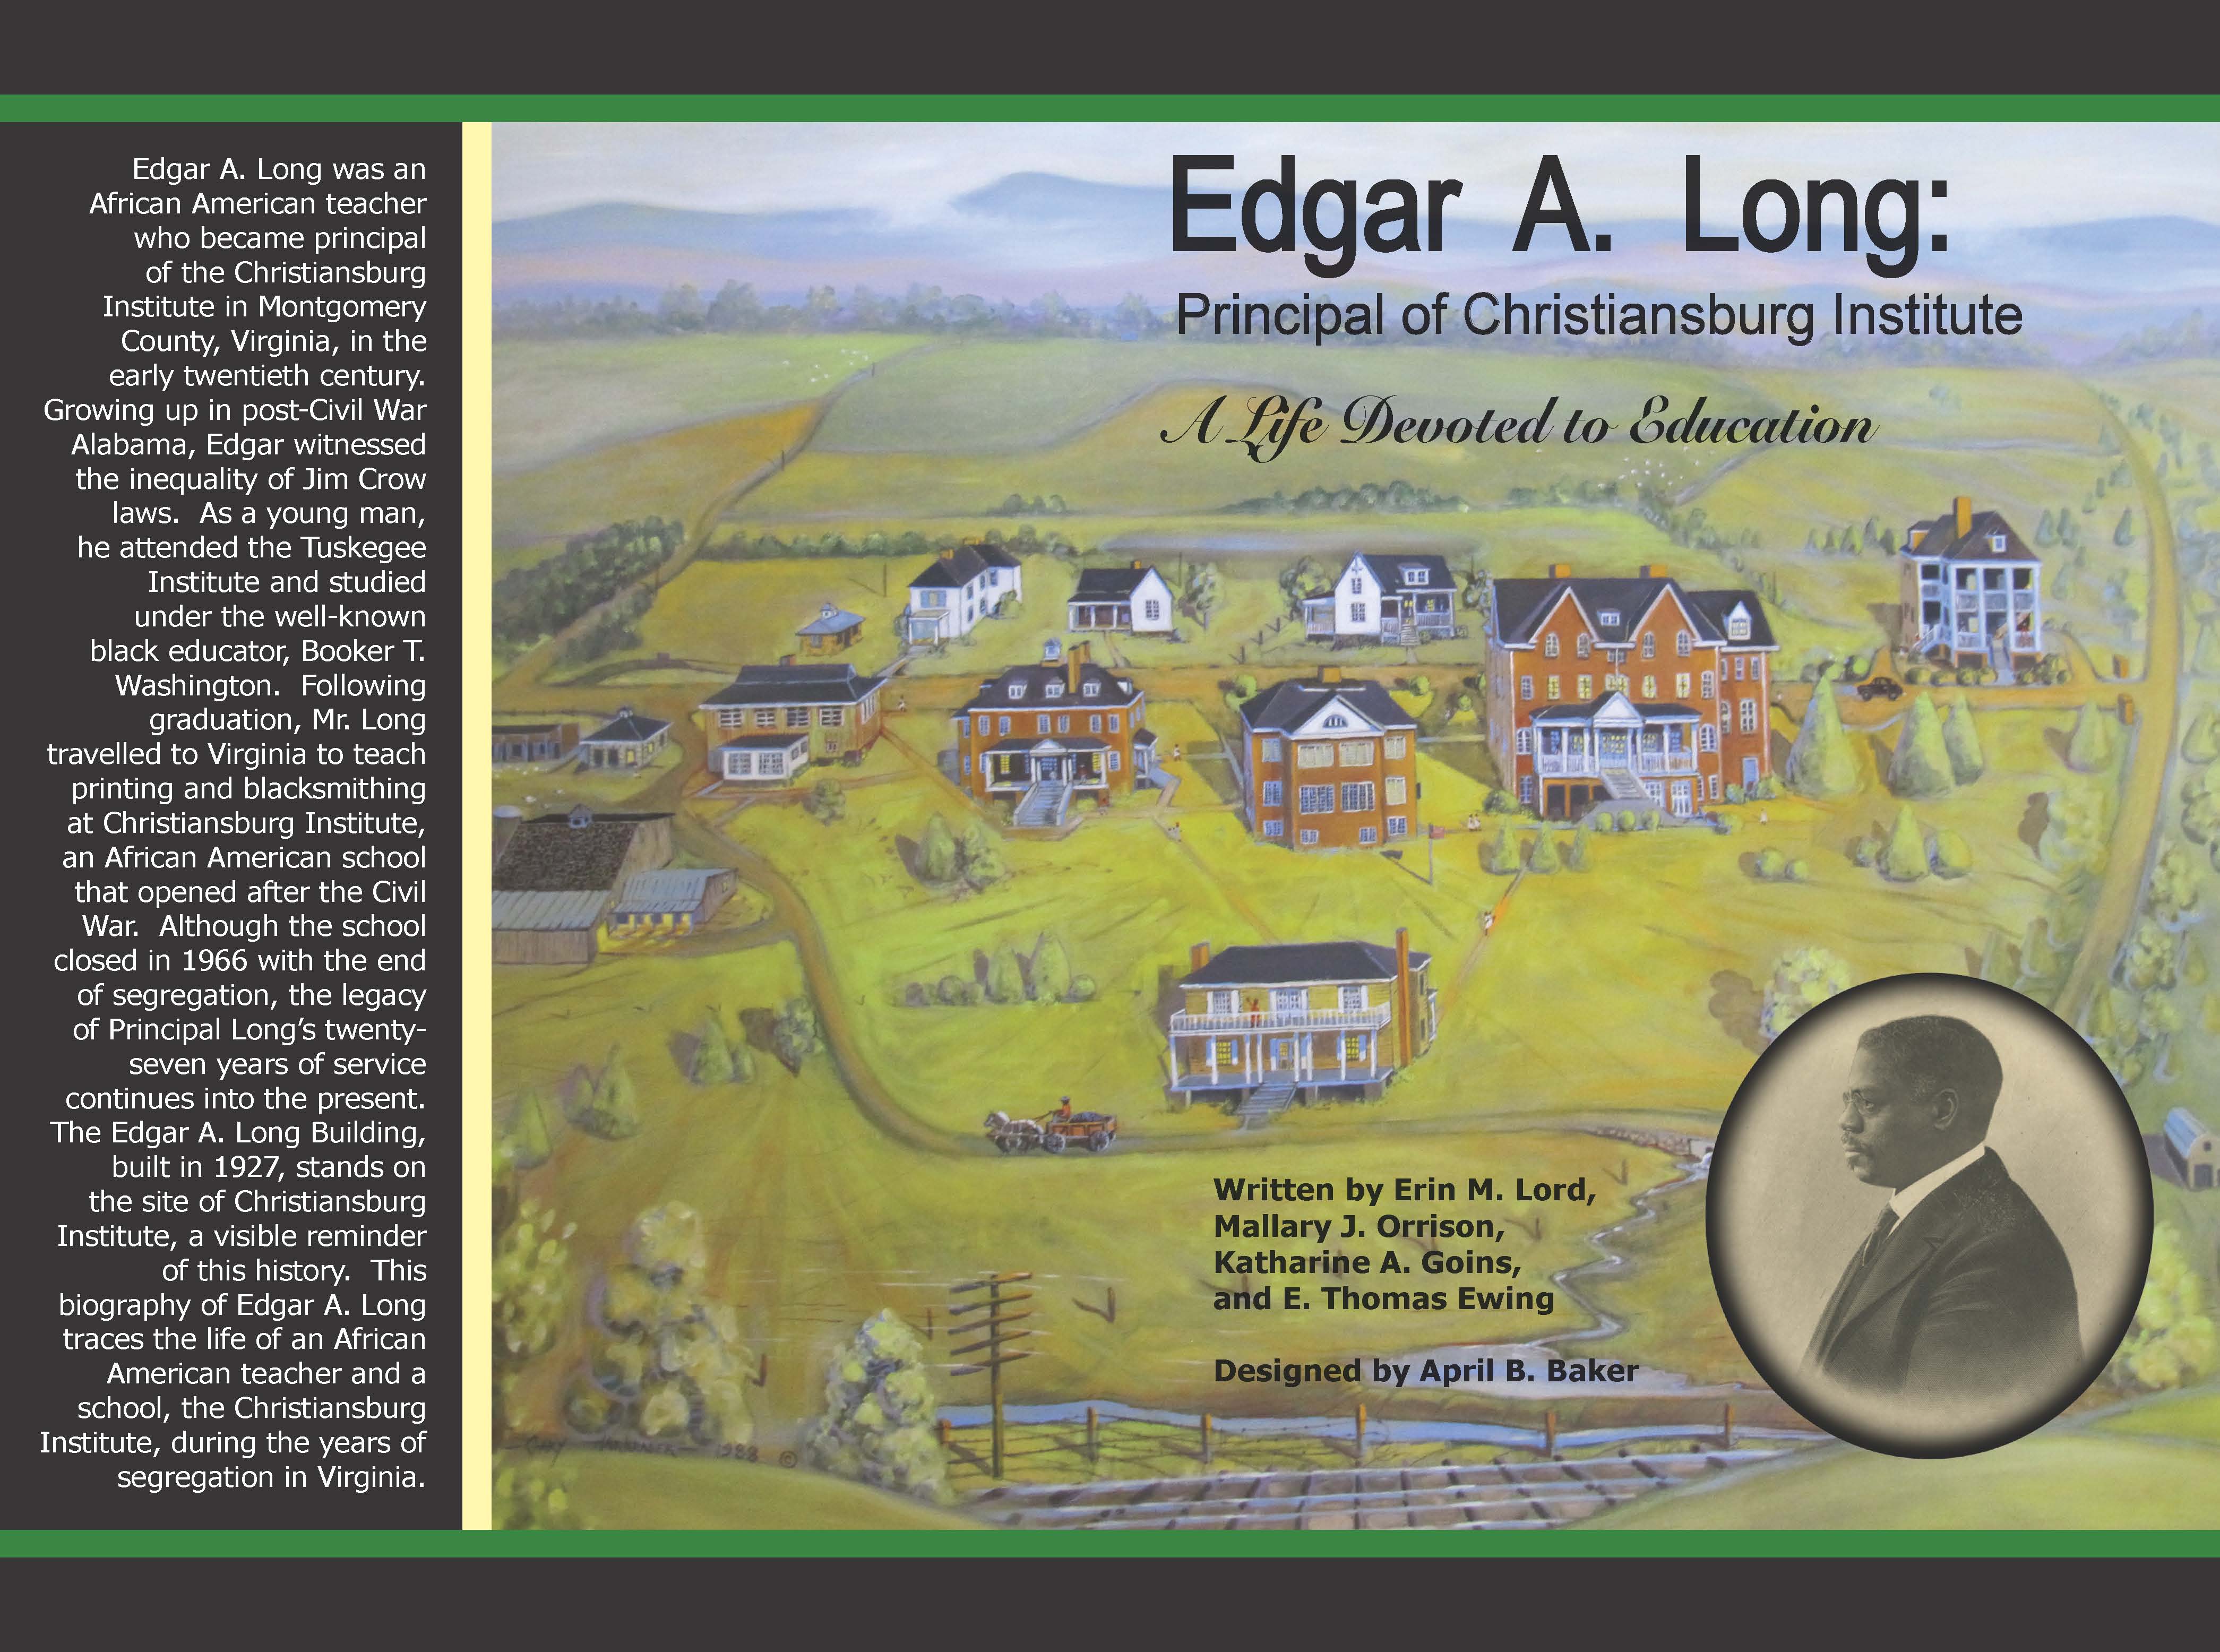 Book cover for "Edgar A. Long: Principal of Christiansburg Institute"